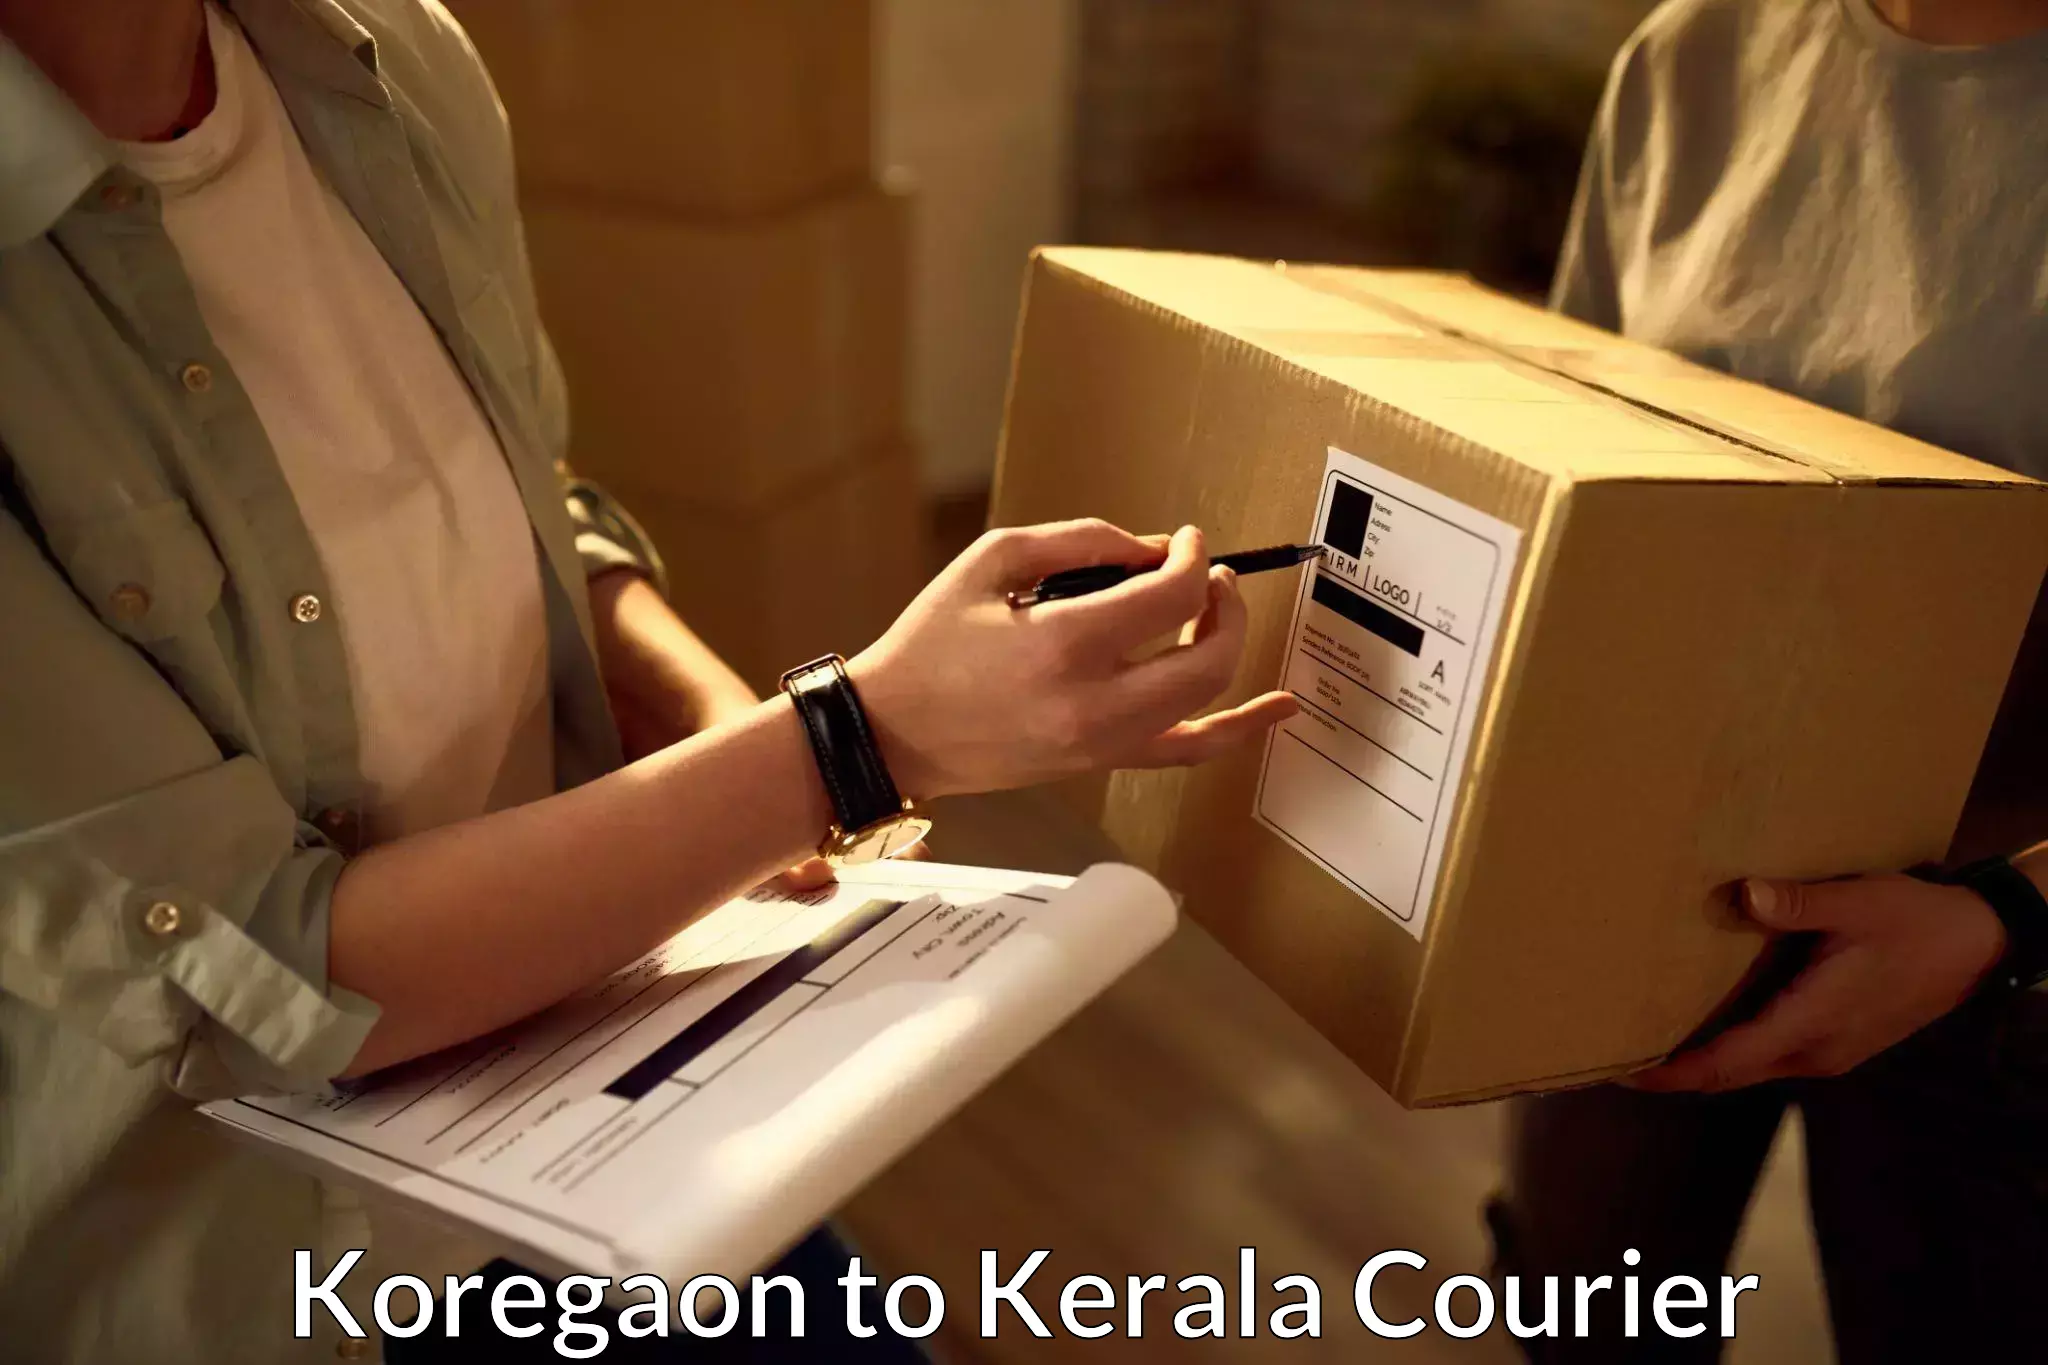 Cash on delivery service Koregaon to Alappuzha